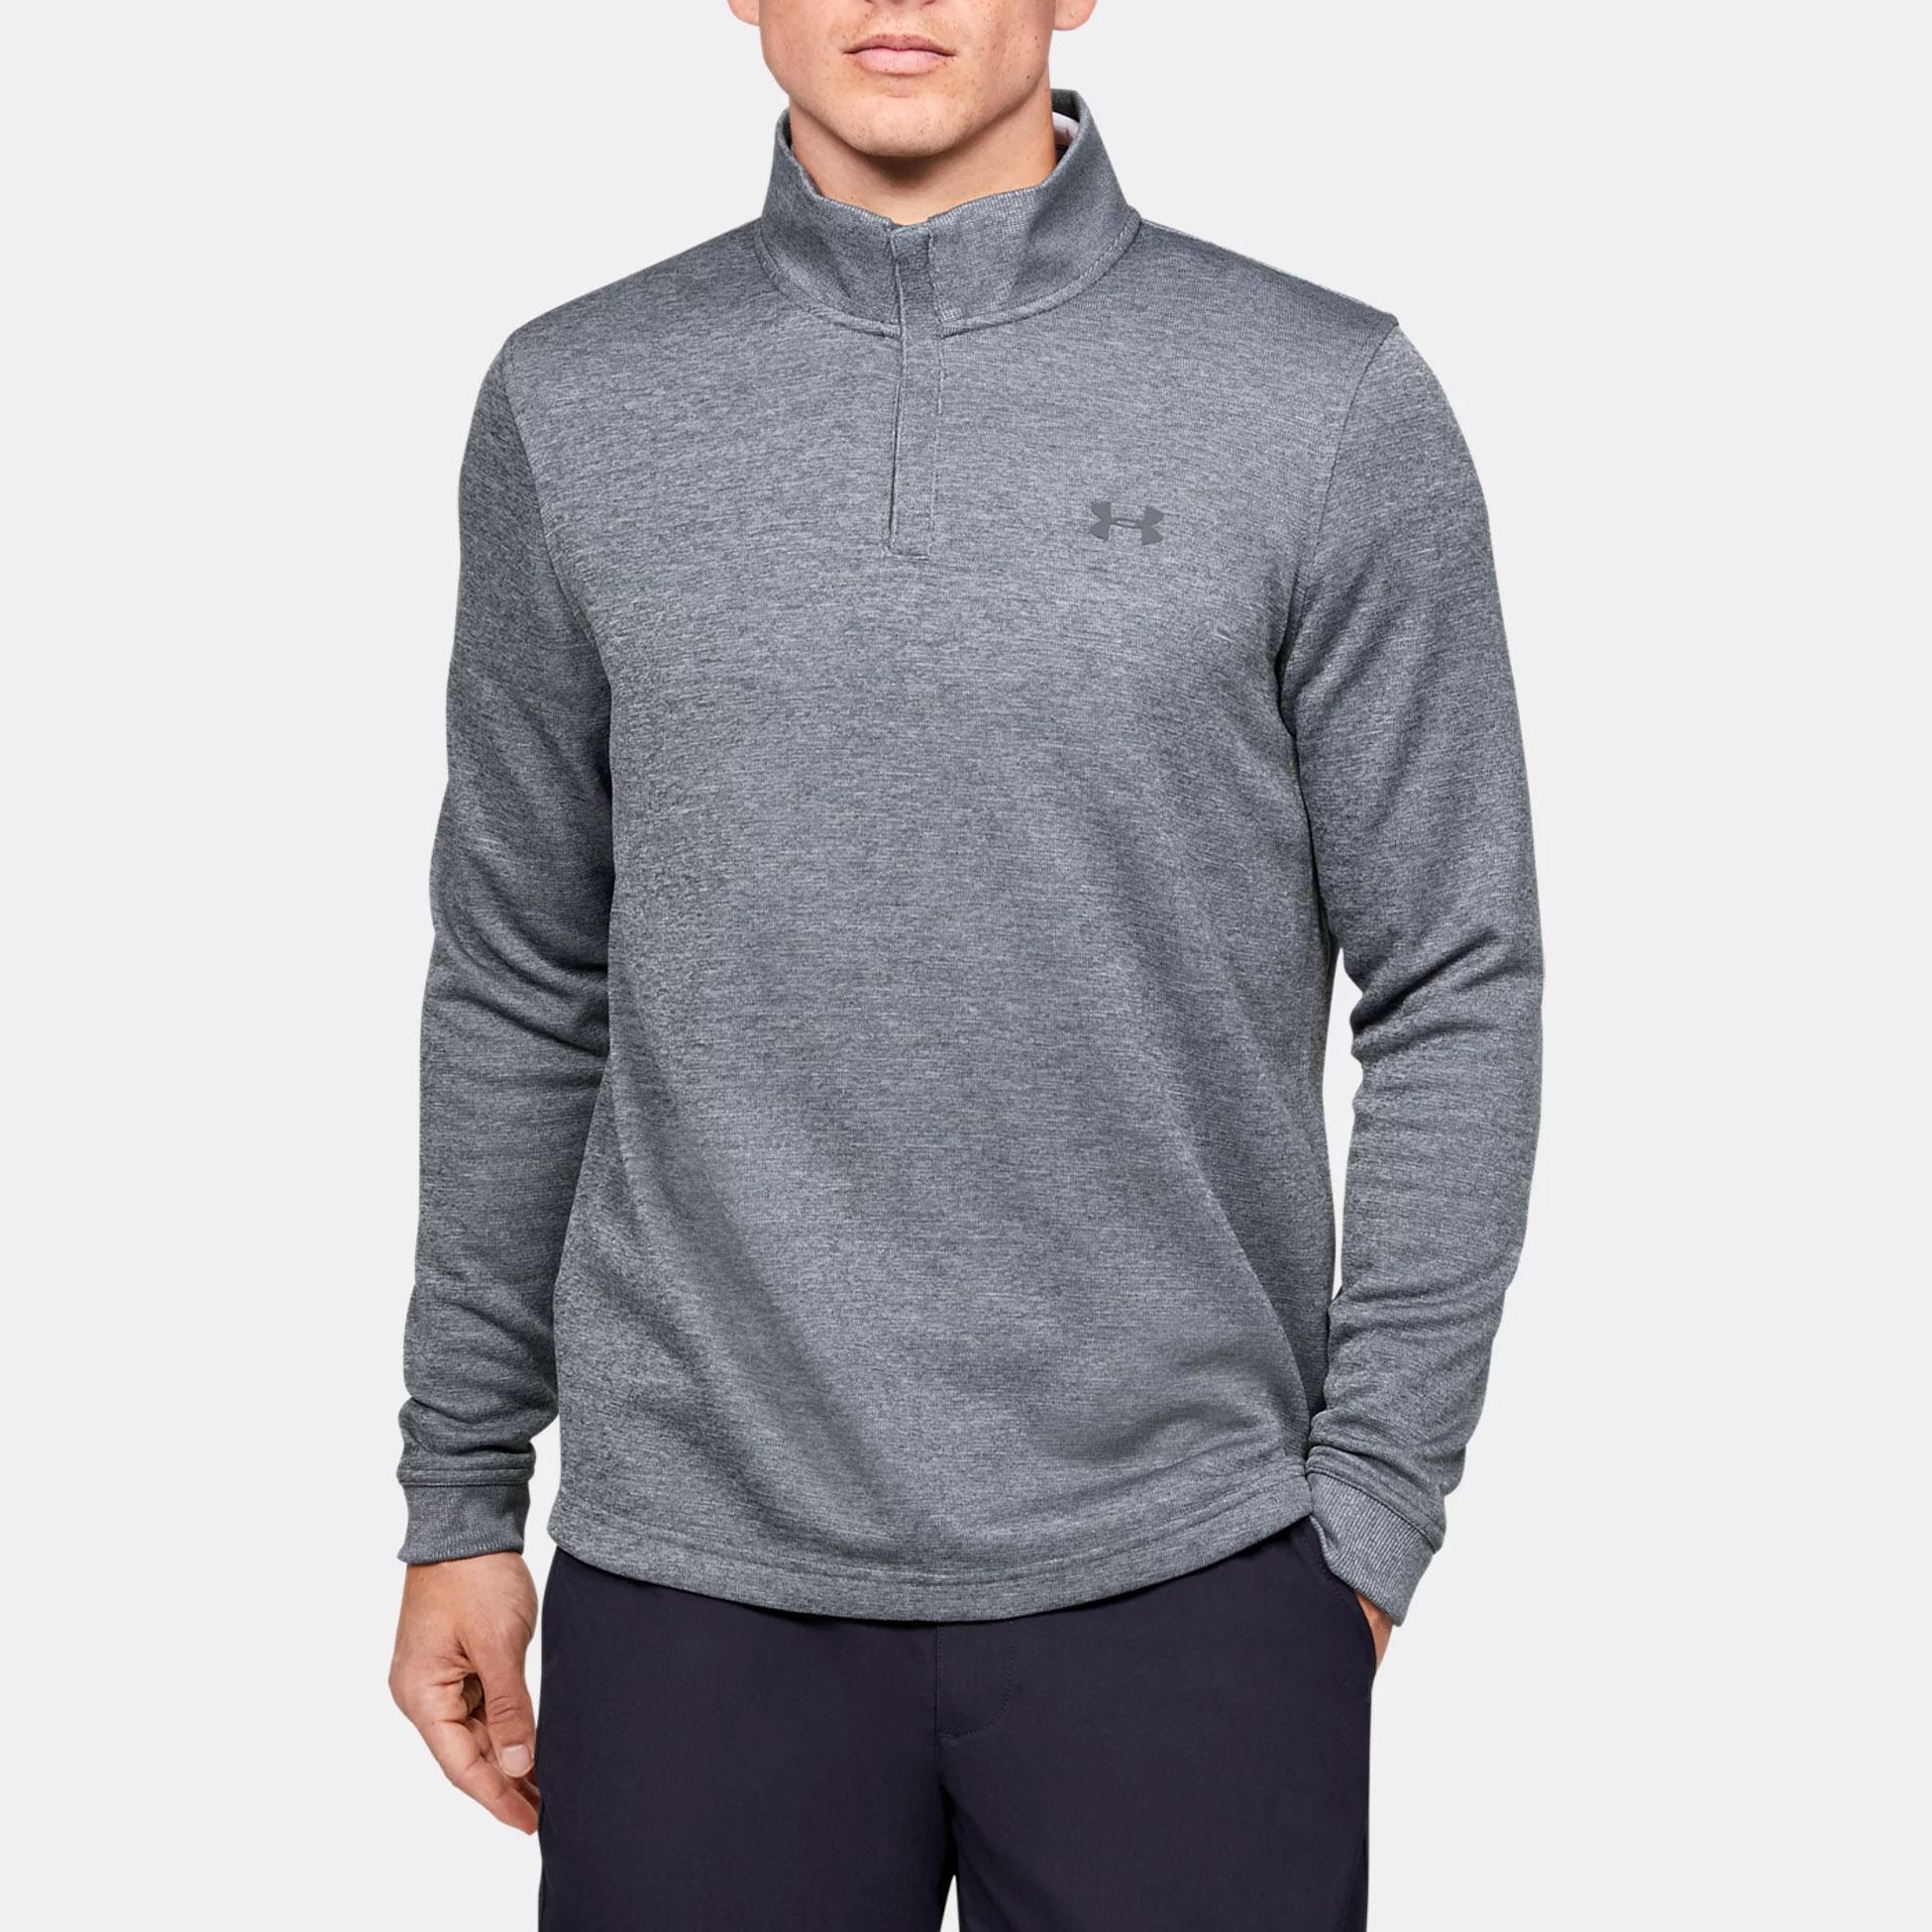 Under Armour Men's UA Storm SweaterFleece for $29.99 Shipped